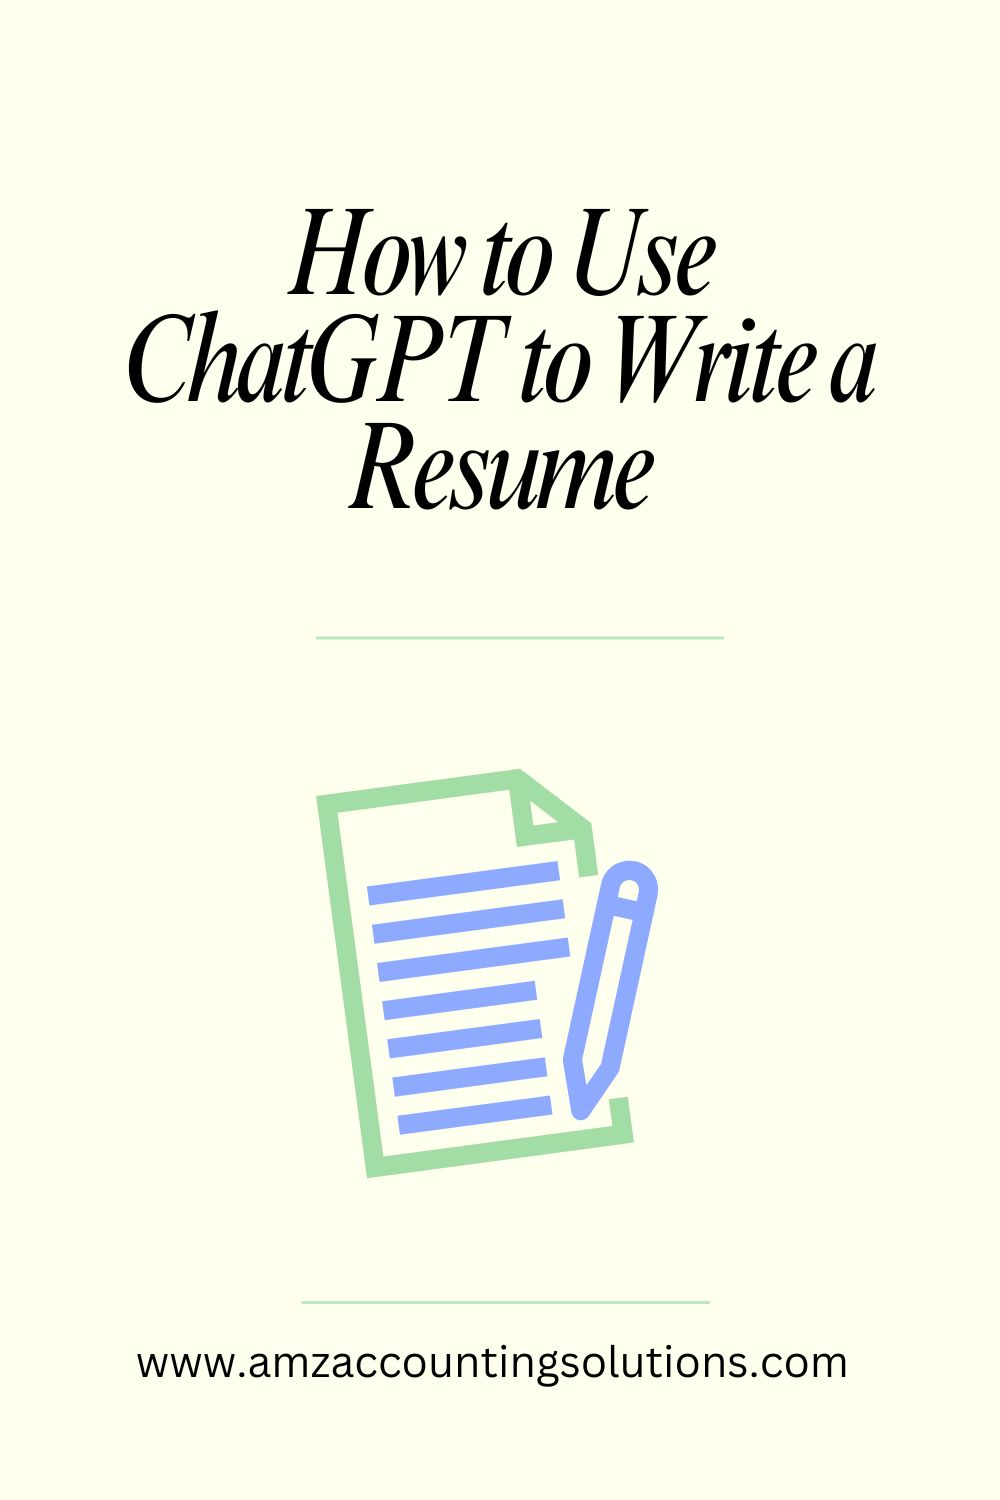 How to Use ChatGPT to Write a Resume